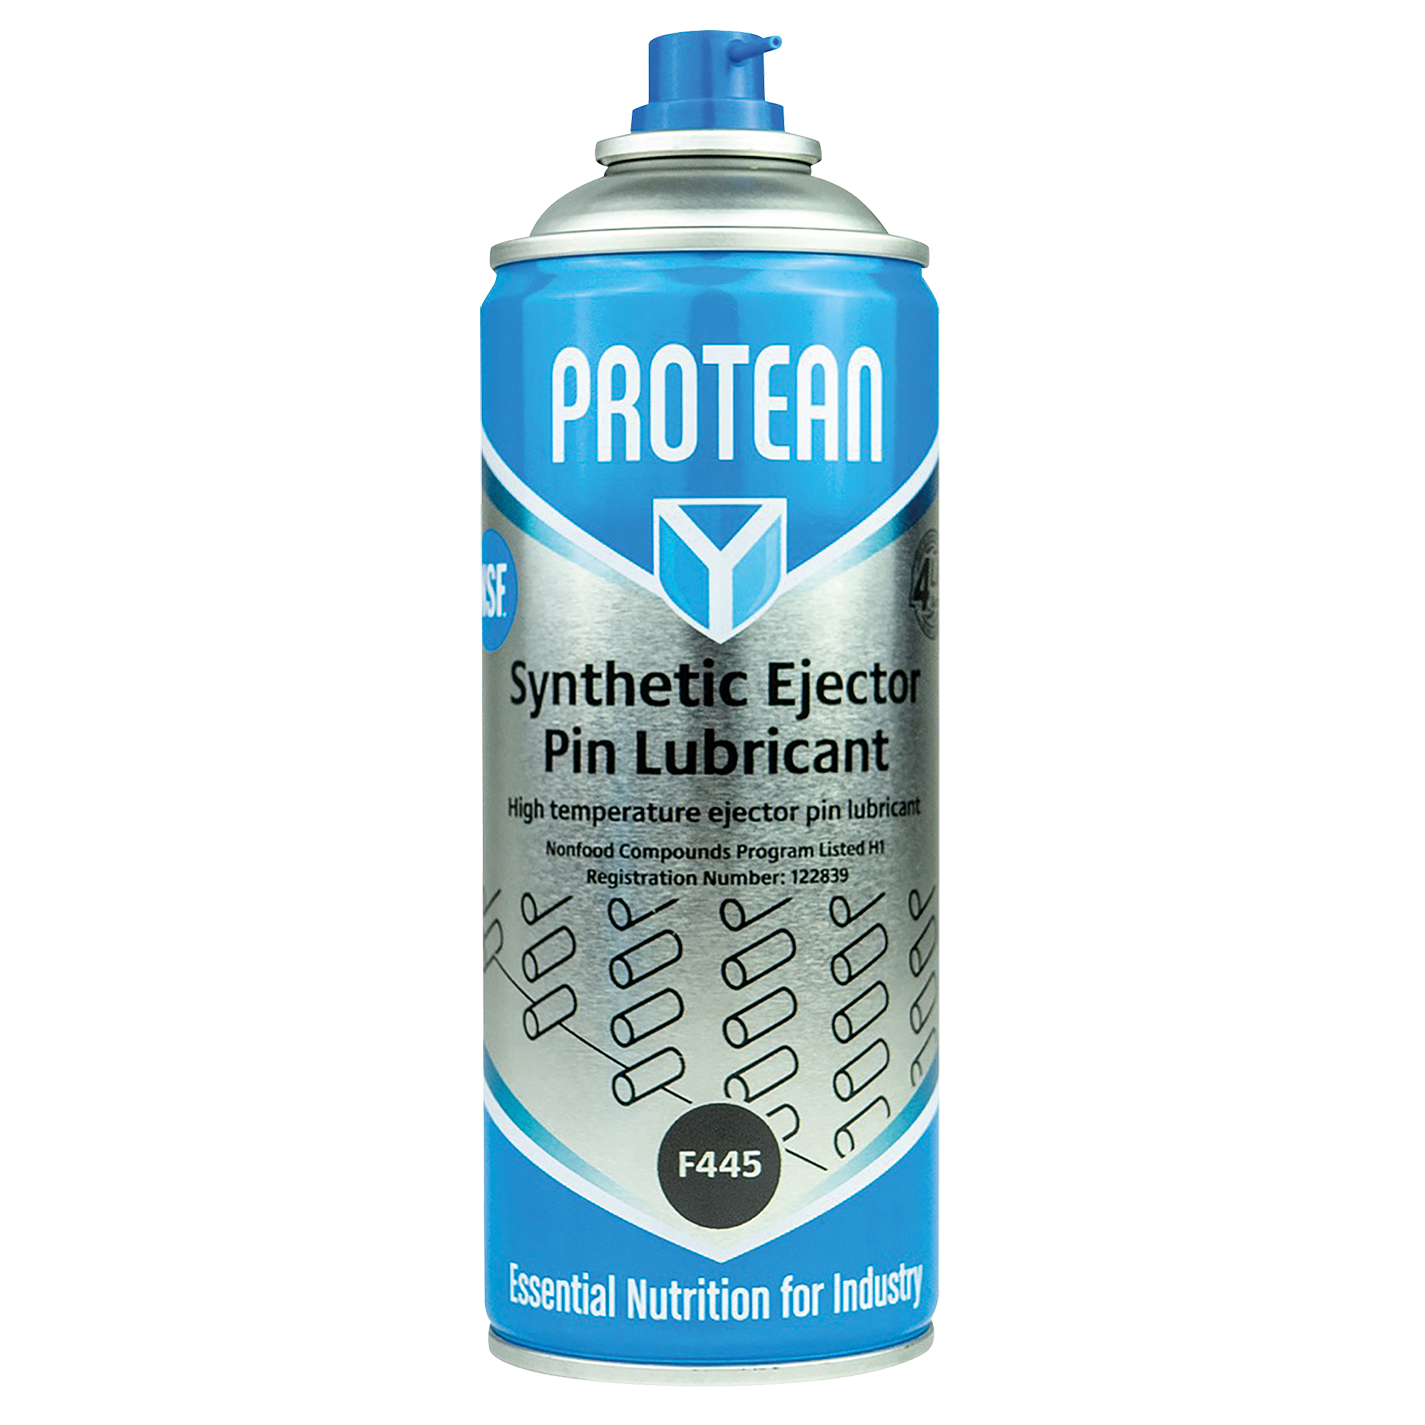 PROTEAN SYNTHETIC EJECTOR PIN LUBRICANT | Pneumatics Direct